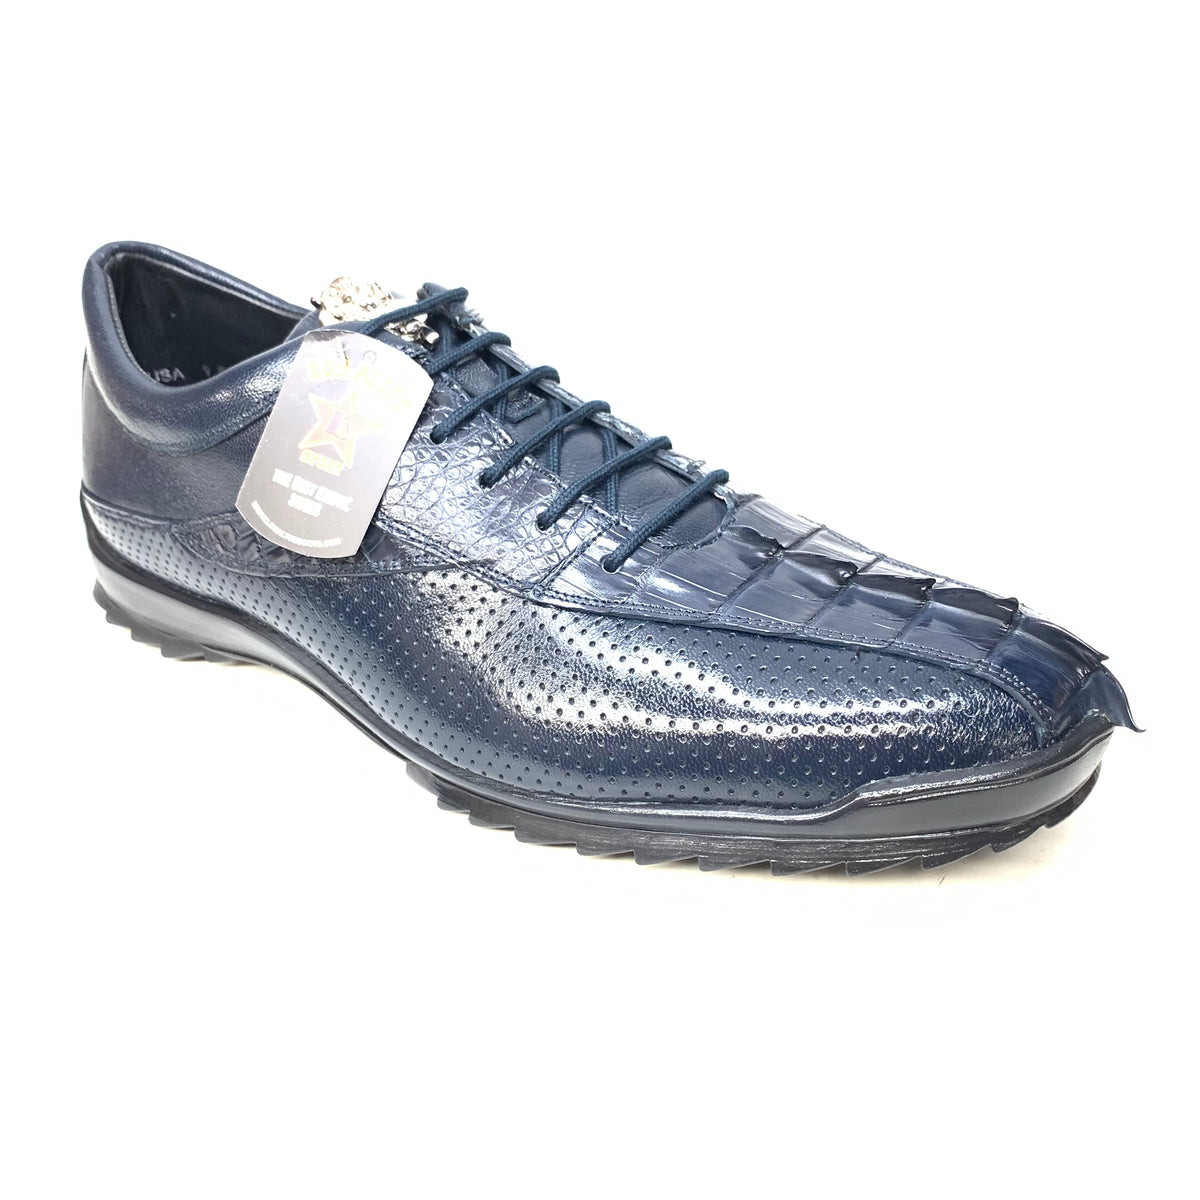 Los Altos Navy Blue Perforated Crocodile Tail Sneakers - Dudes Boutique